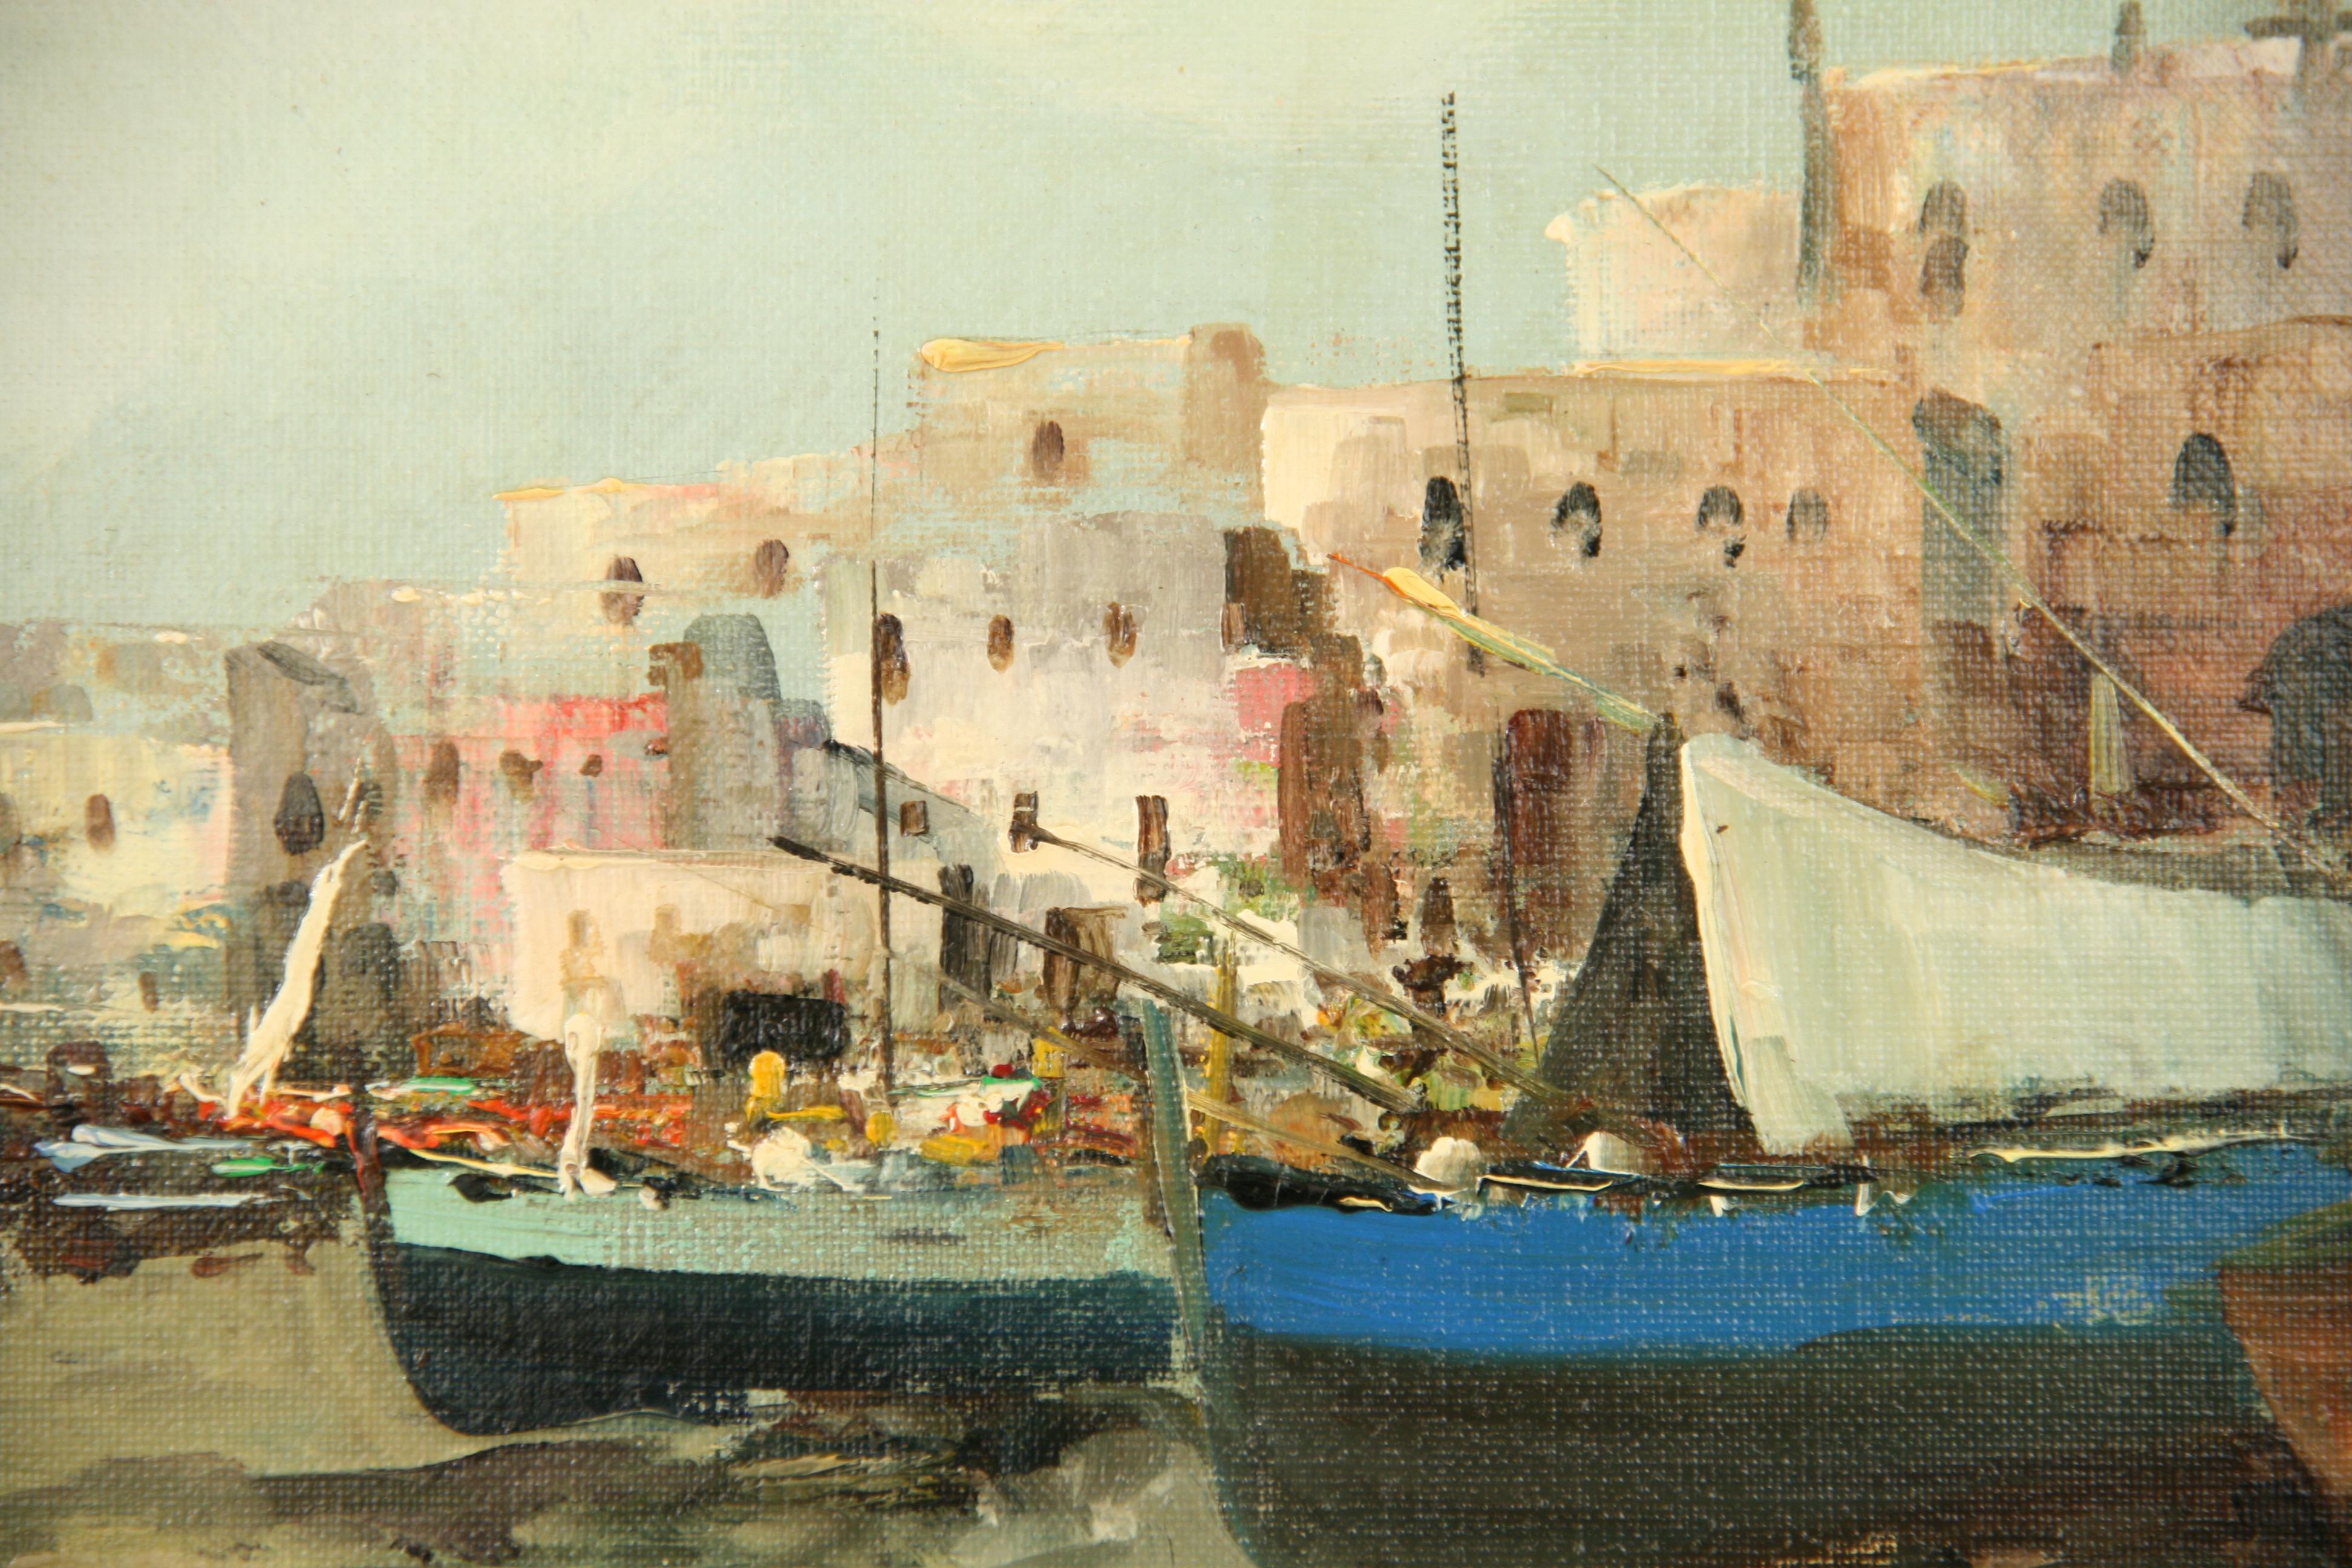   Fishing Boats in a Harbor Italian oil Painting 1950 - Brown Landscape Painting by De Angelis